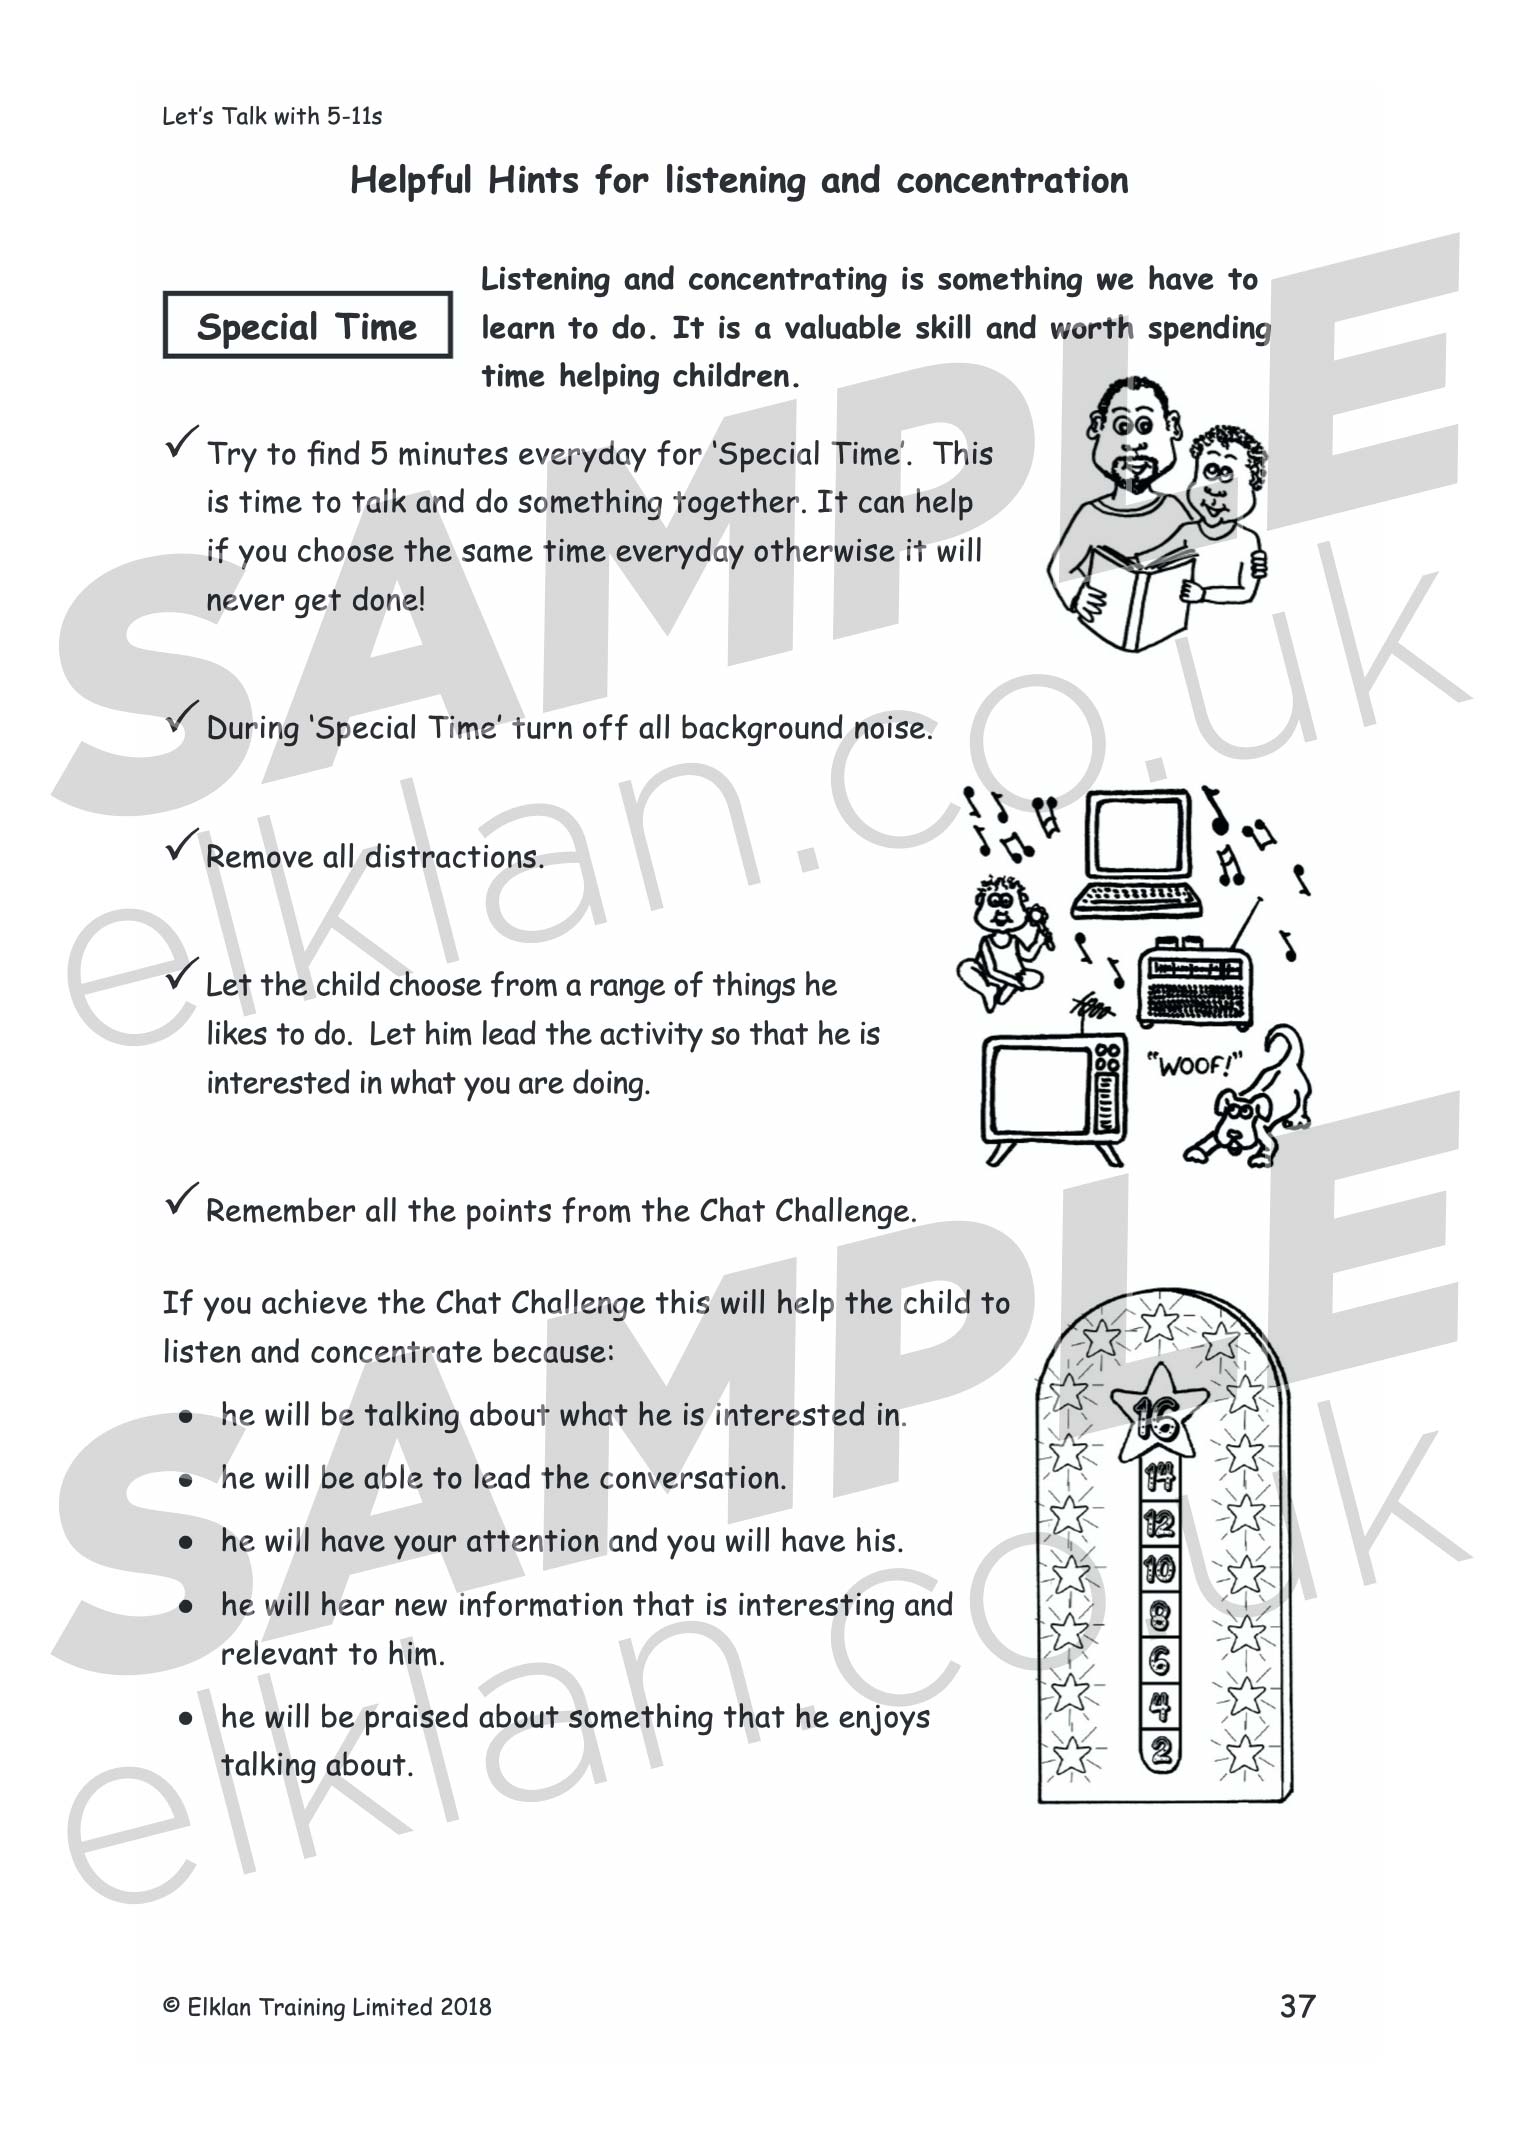 Let's Talk with 5-11s workbook sample image